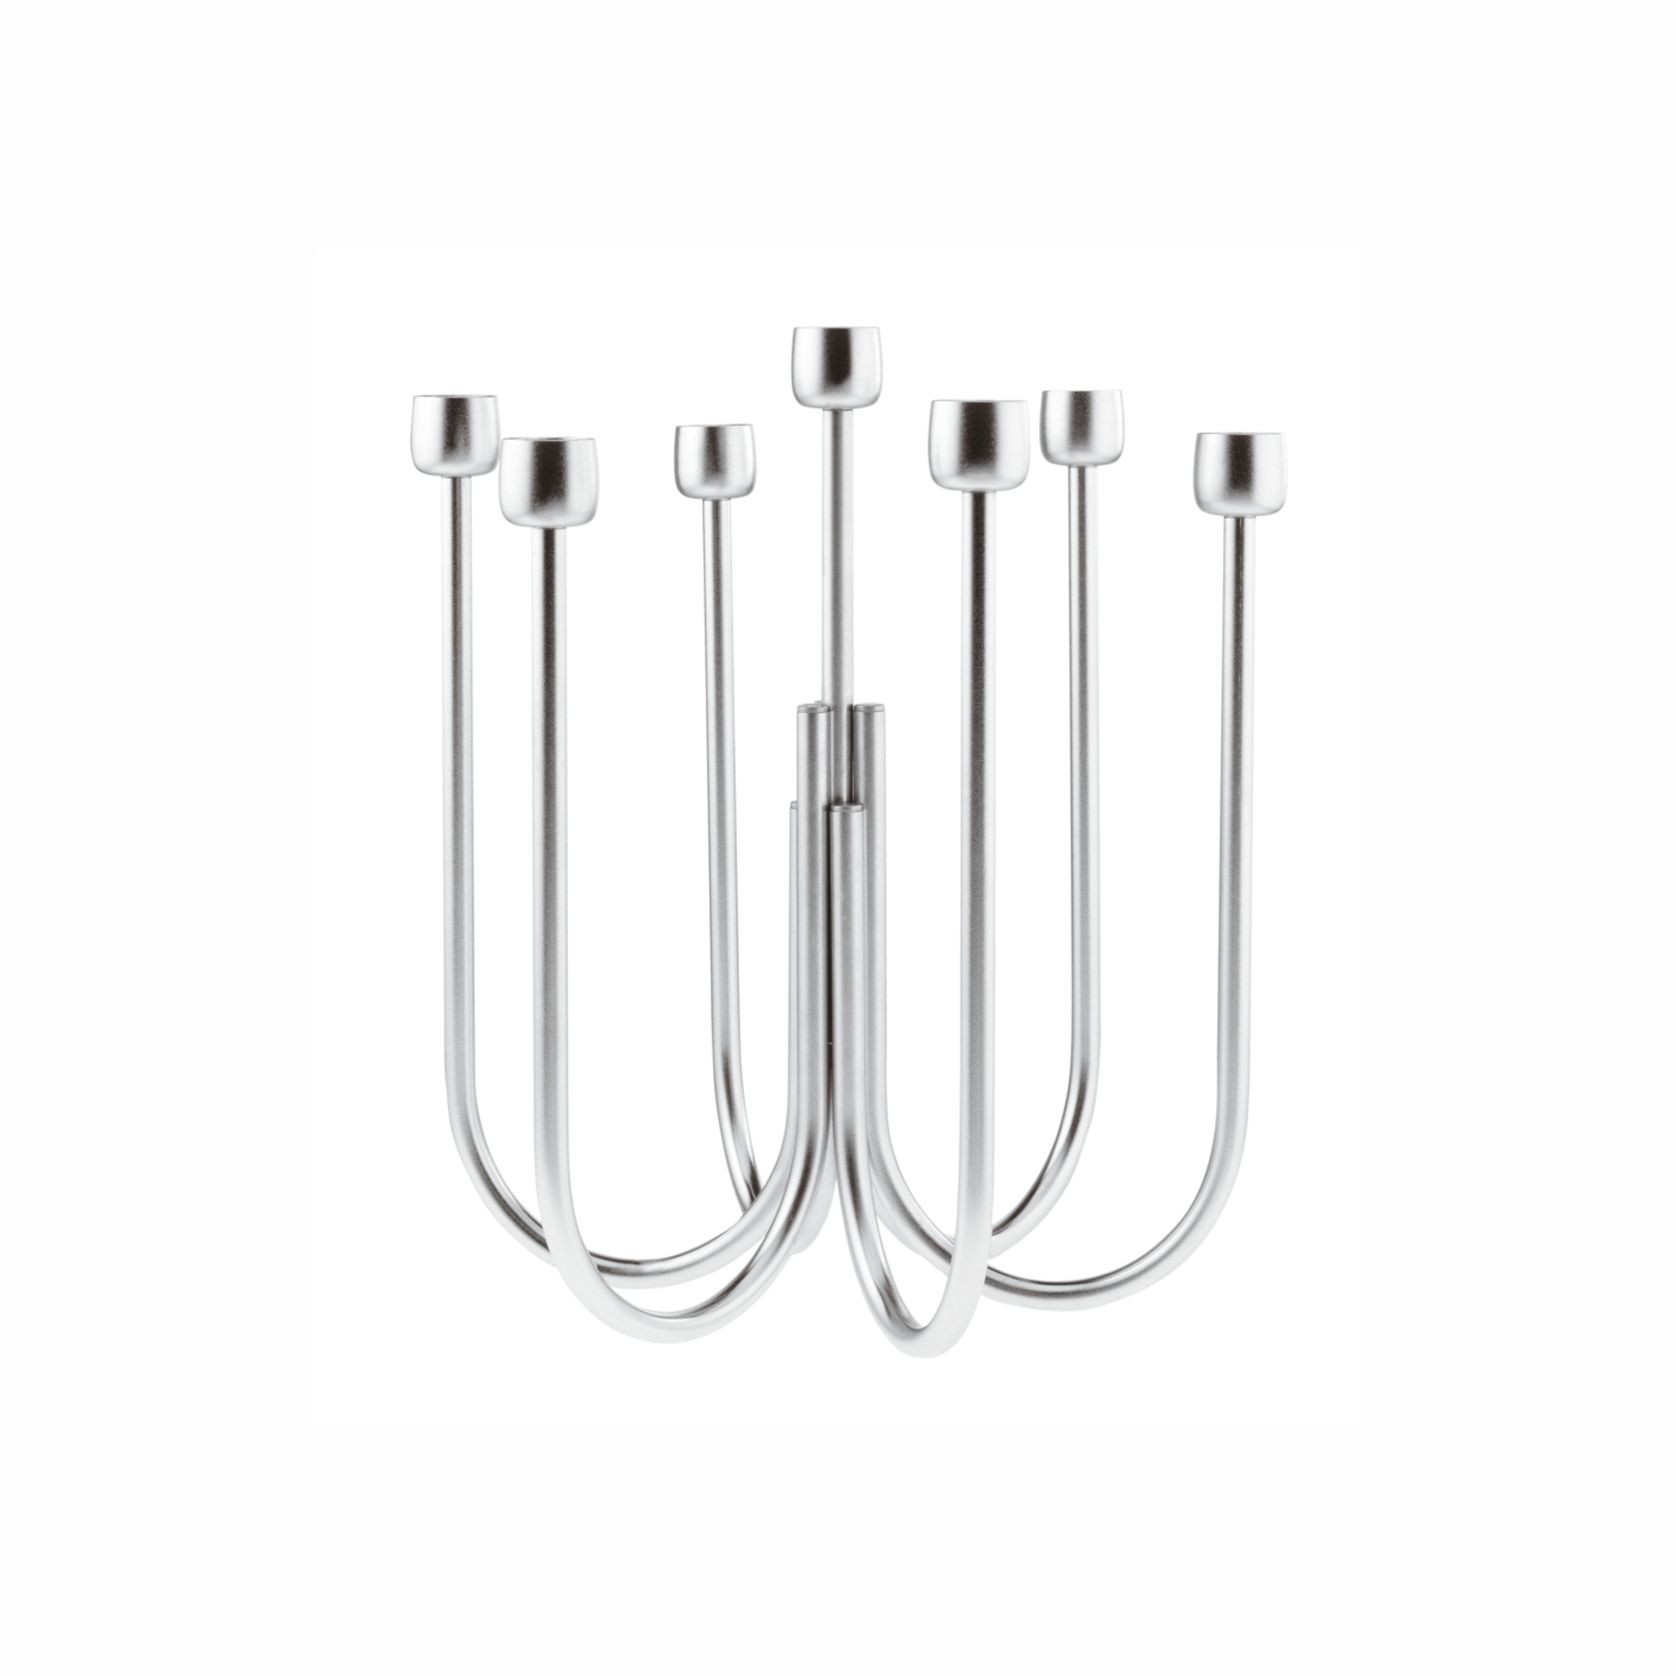 Kyma Candelabra 7 lights Hi-tech stainless gallery detail image